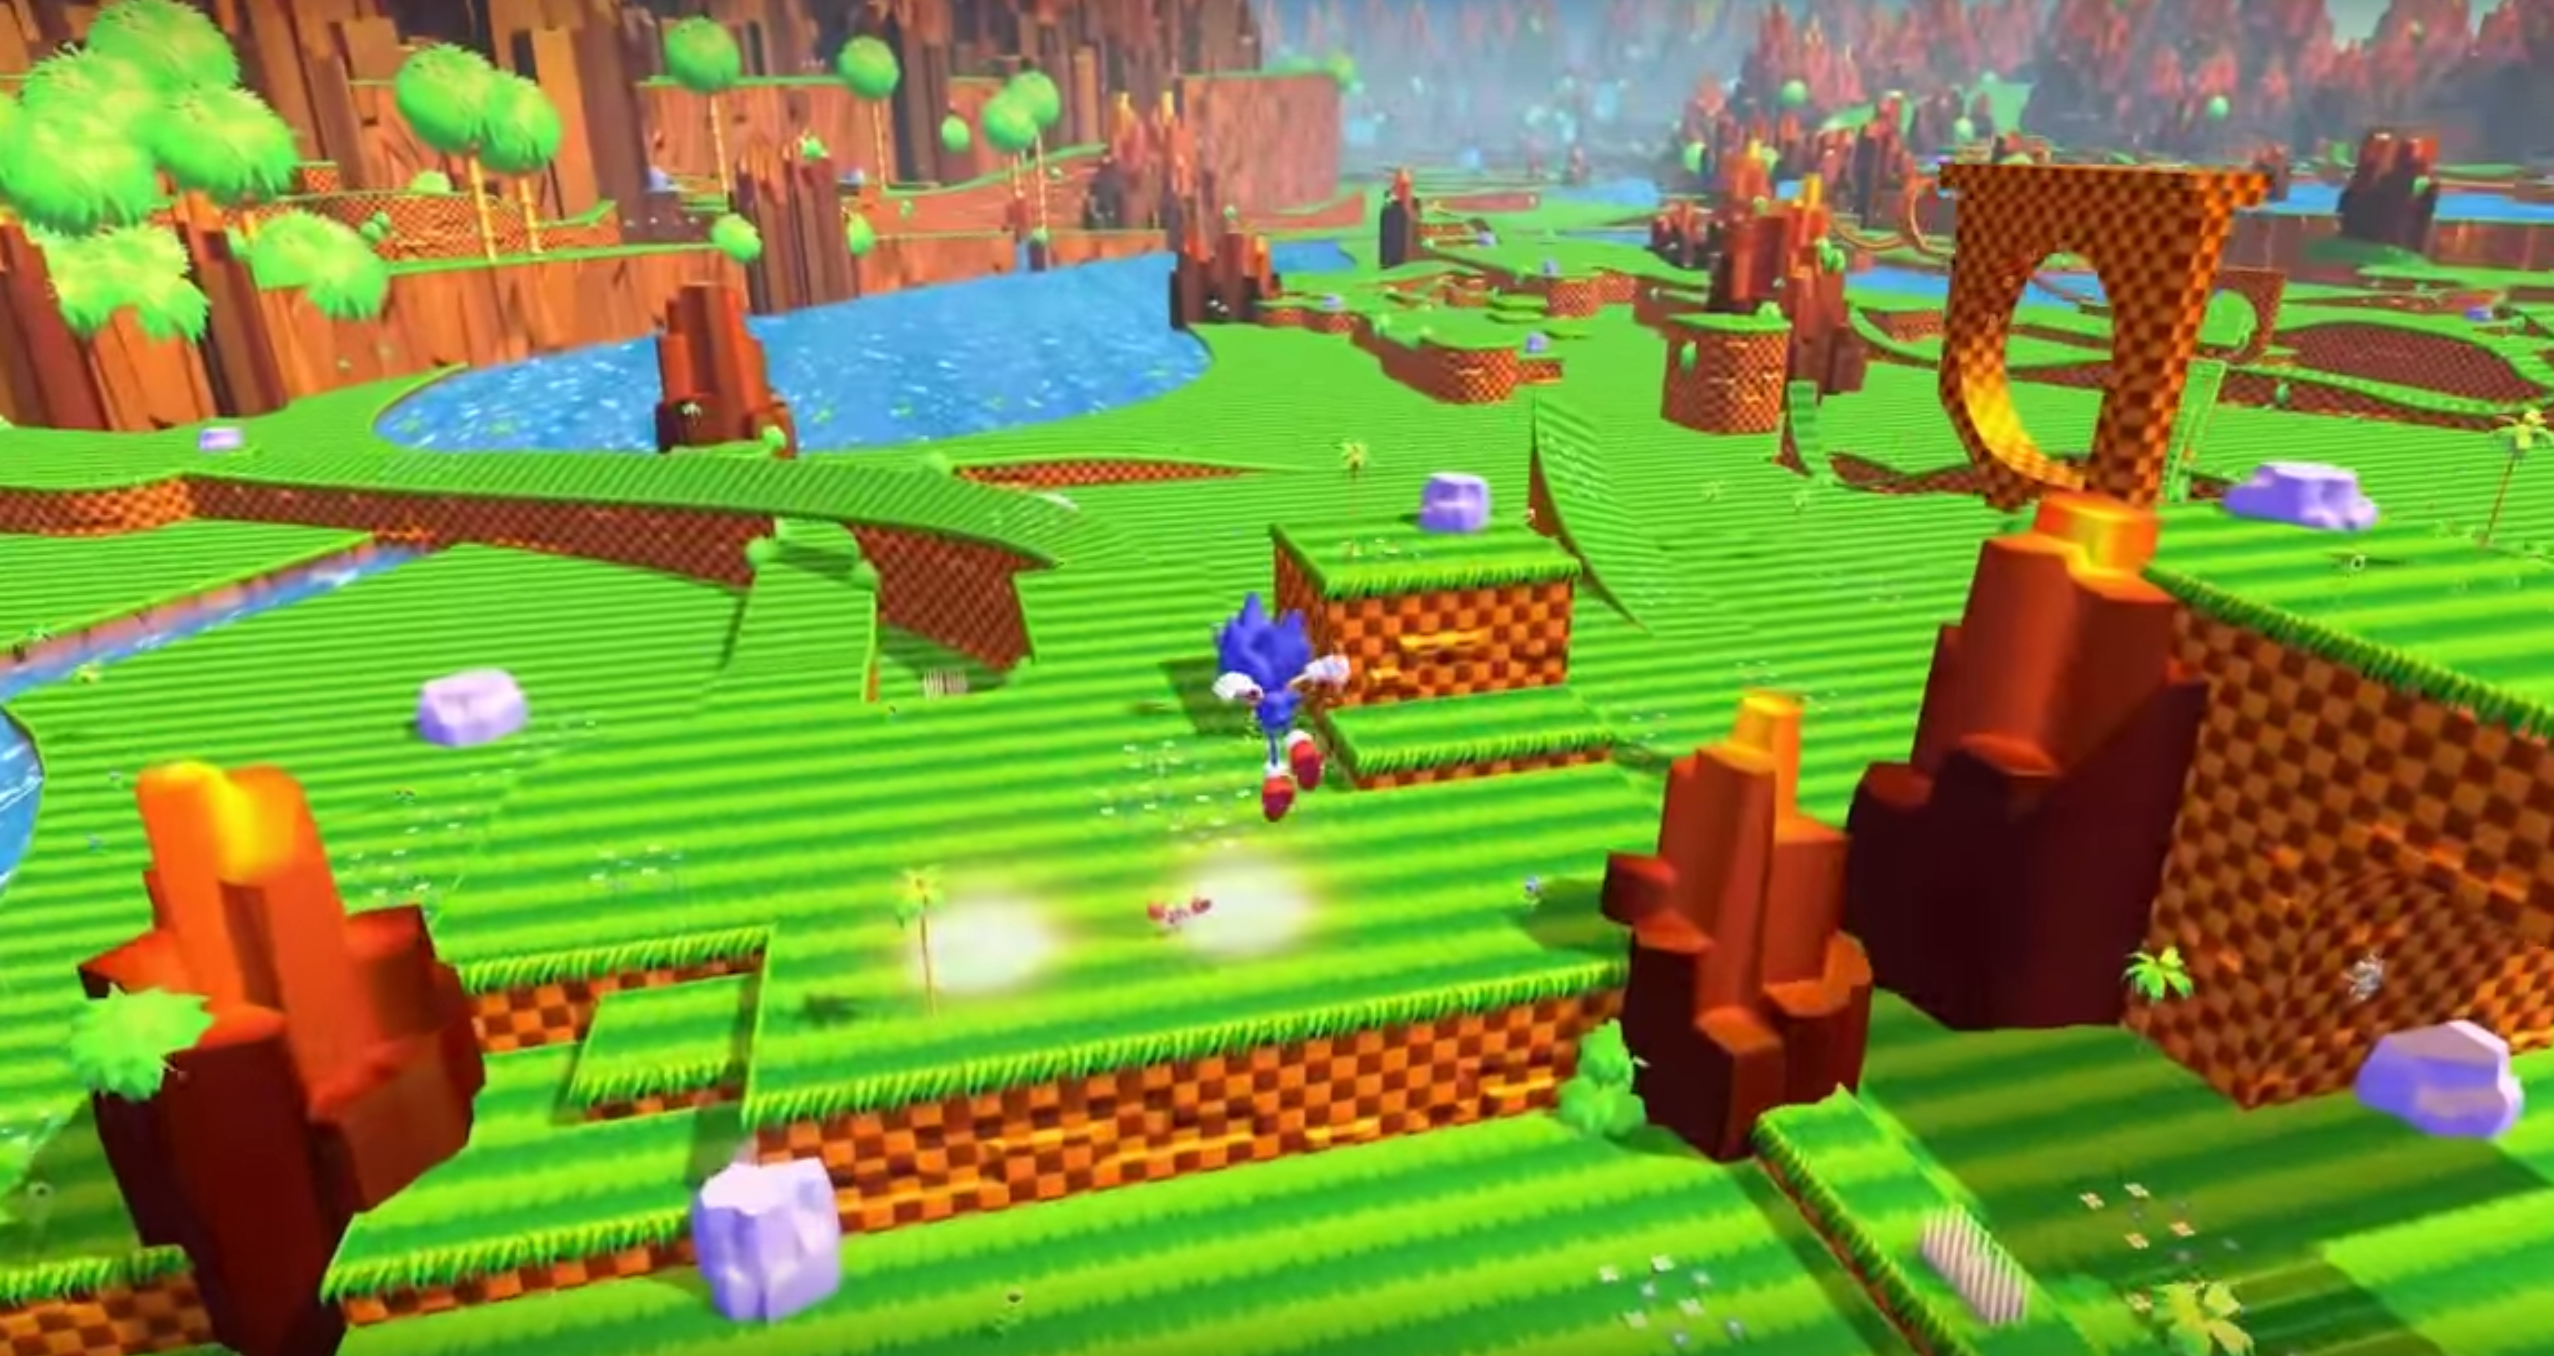 Sonic Utopia is the PERFECT Sonic Game 